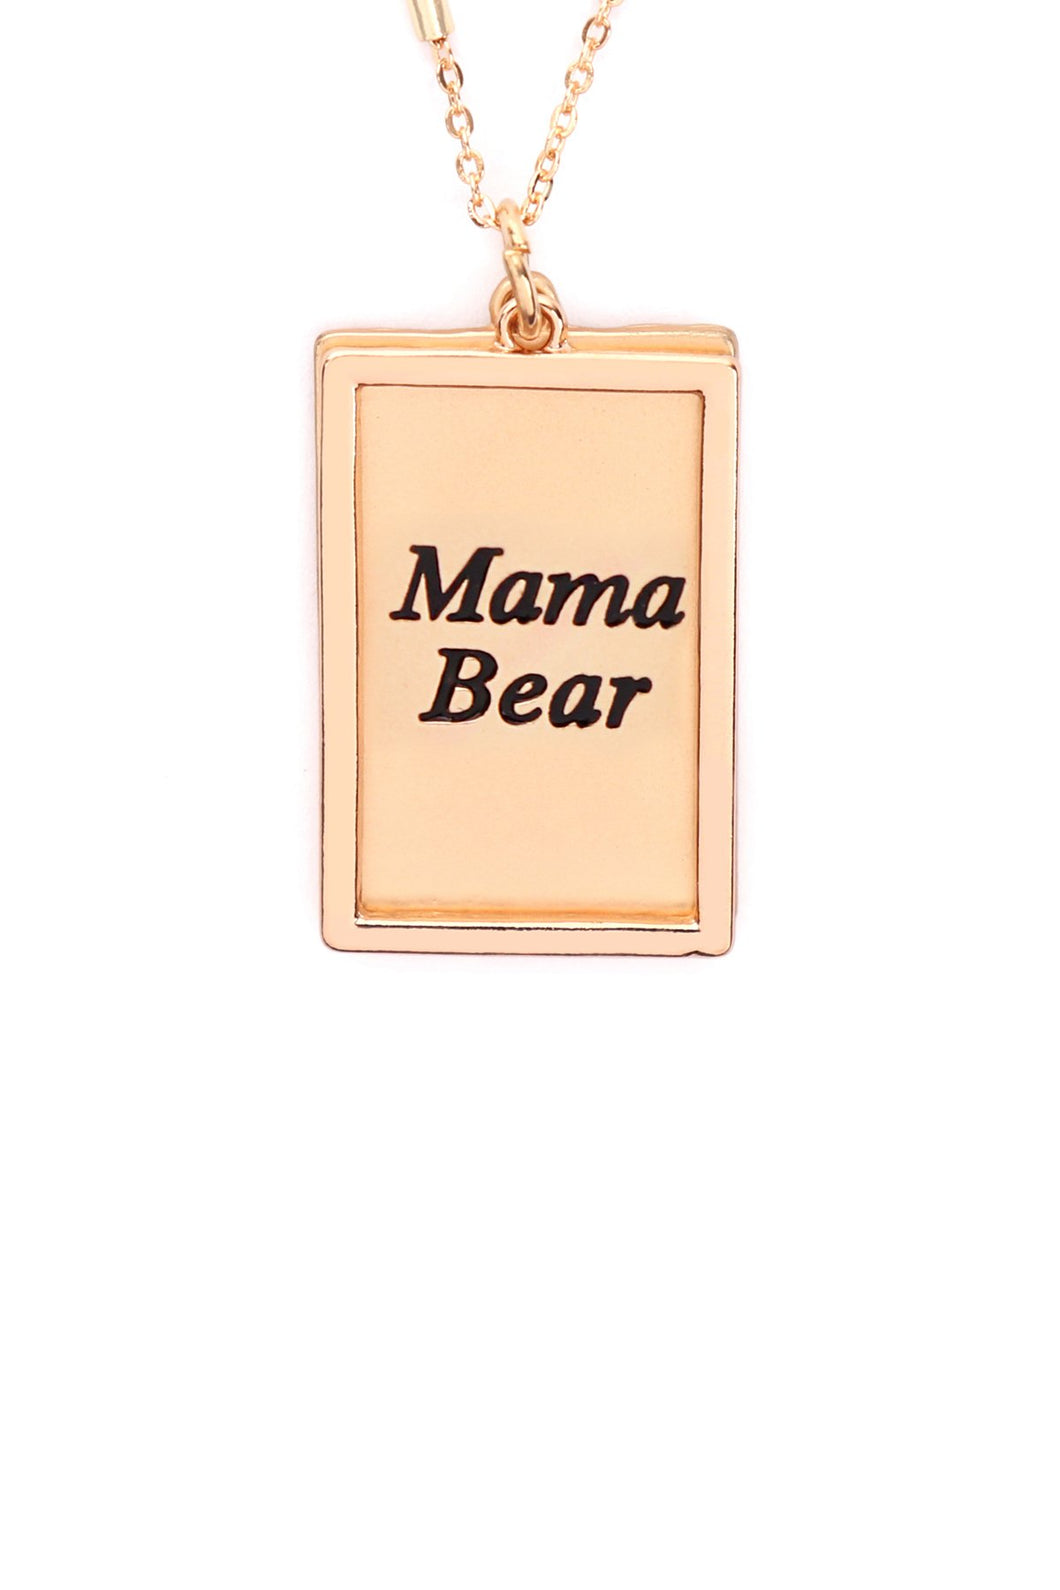 Mama Bear Etched Brass Box Pendant Necklace